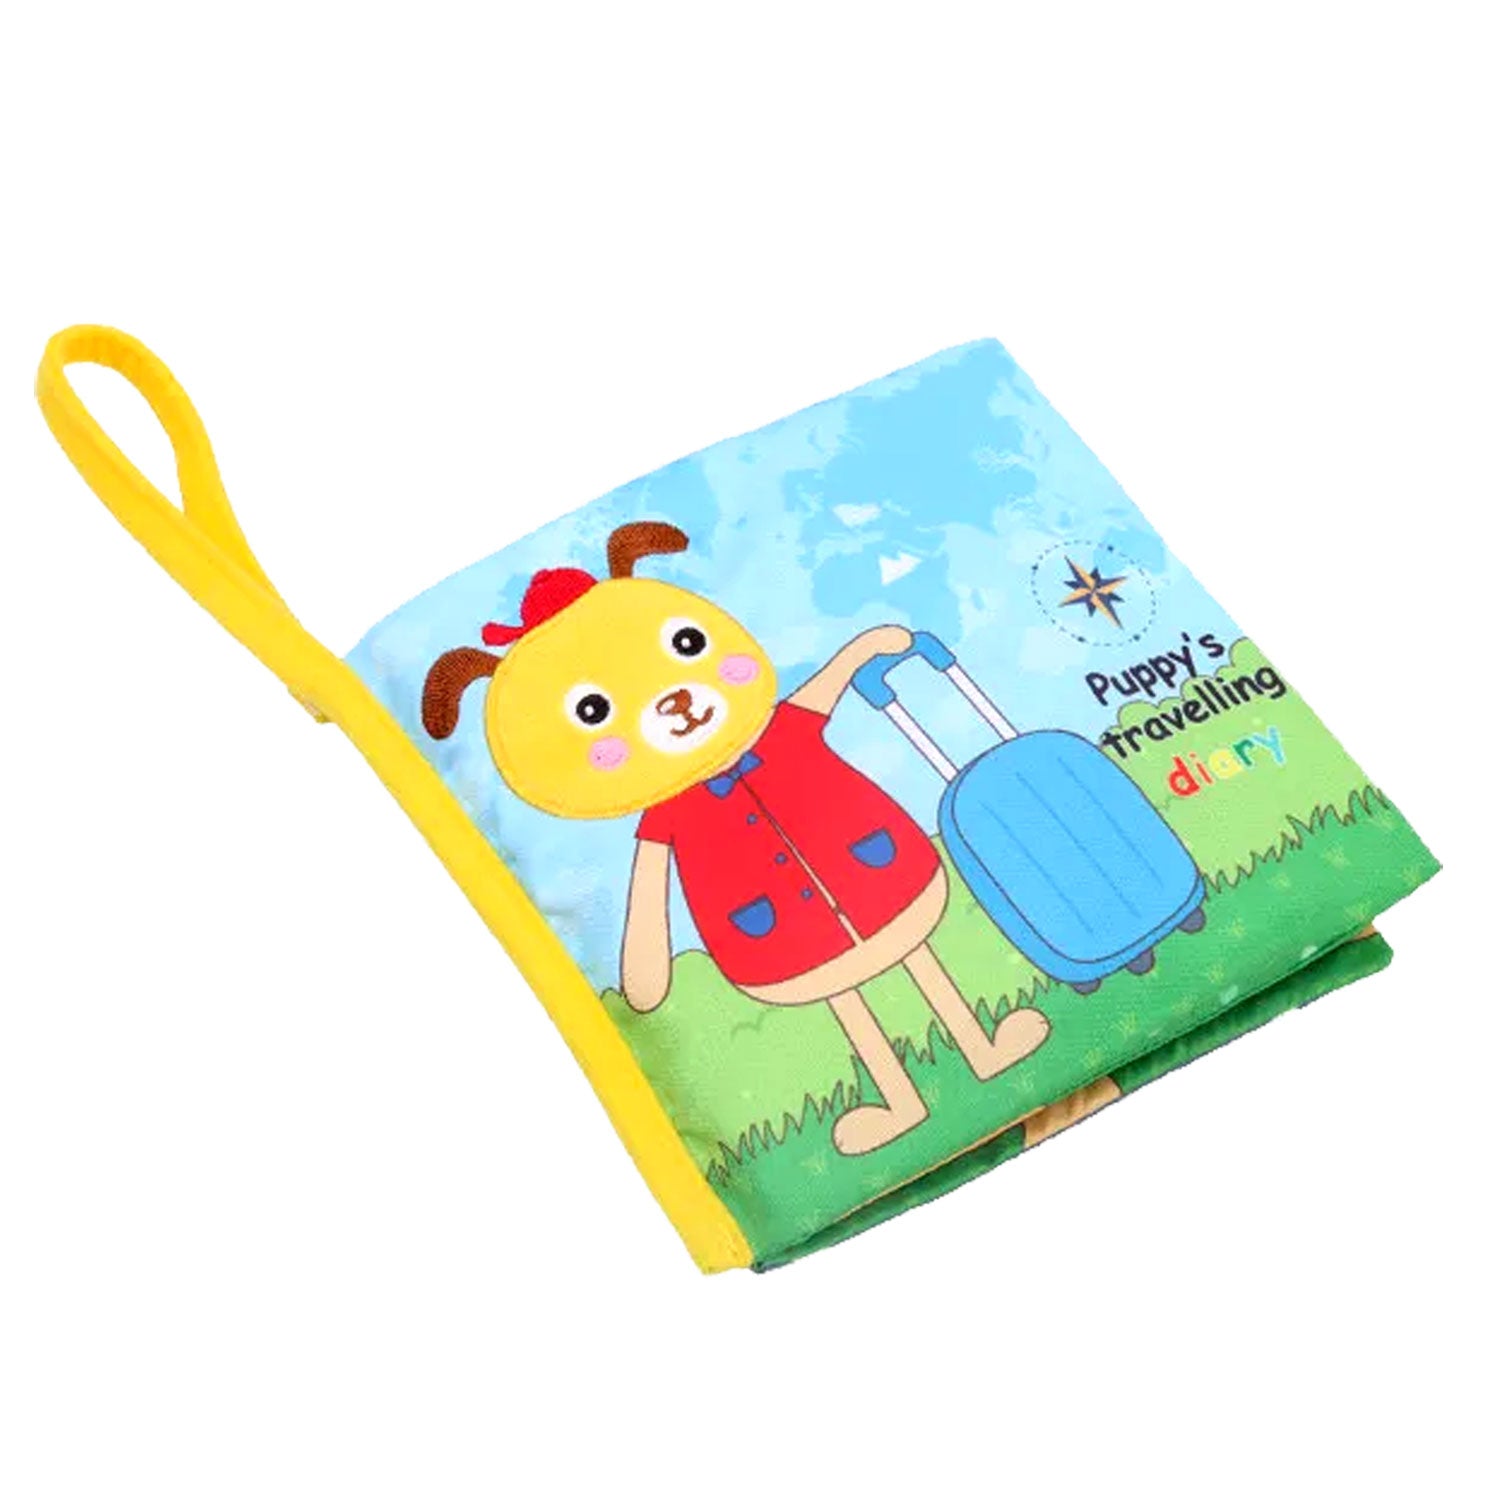 Baby Moo Puppy's Travelling Diary With Squeaker, Rattle And Rustle Paper Sound Cloth Book  - Blue